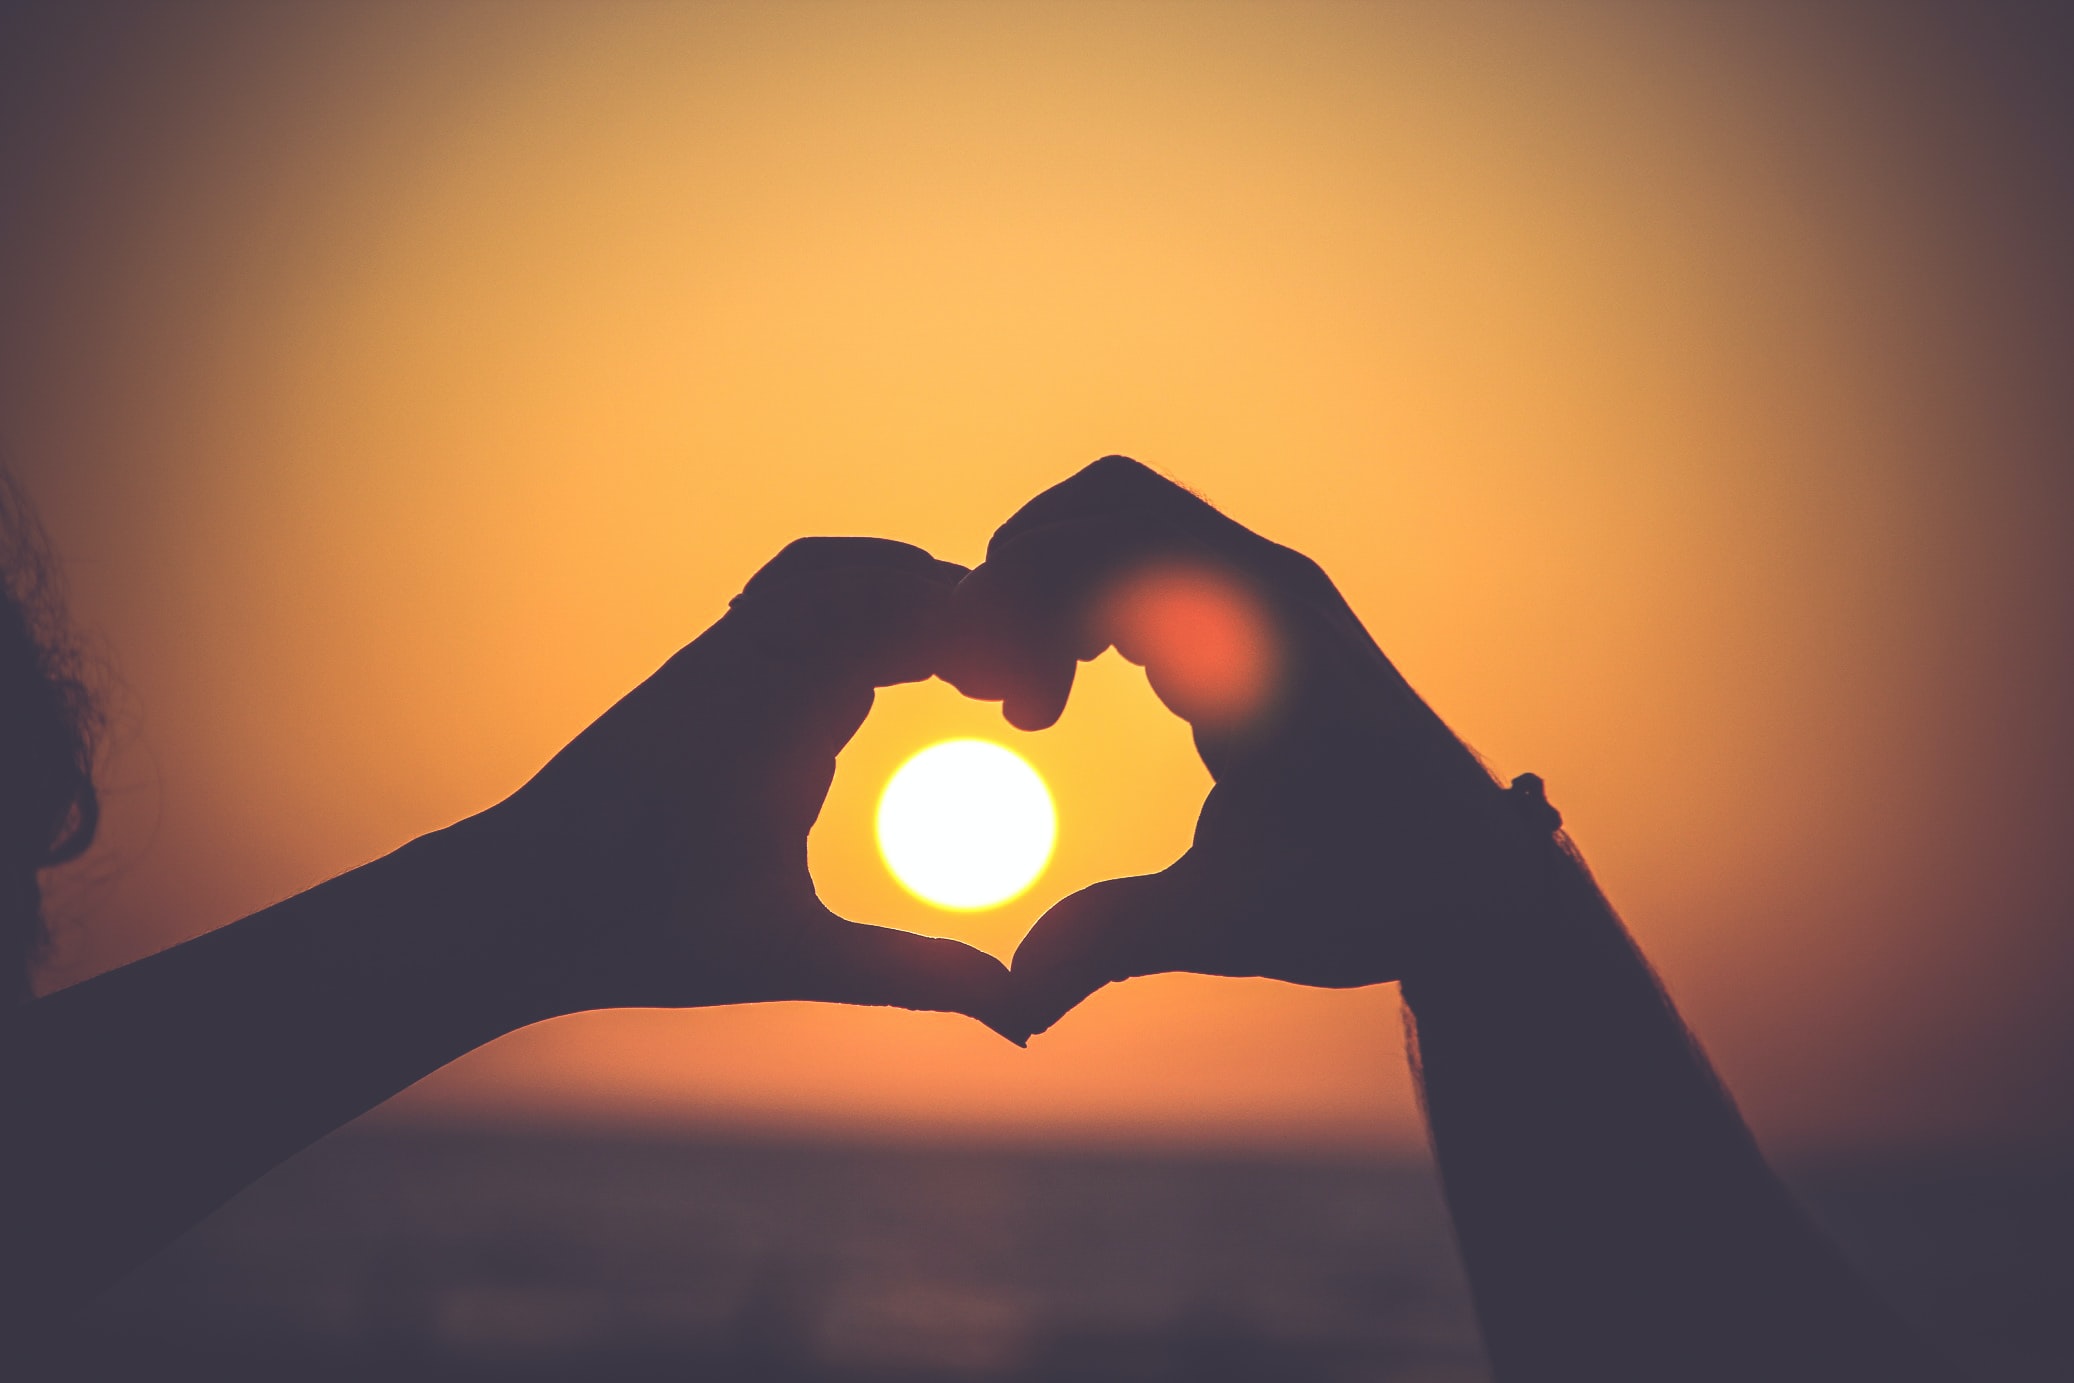 Hands forming a heart shape with sunset in background